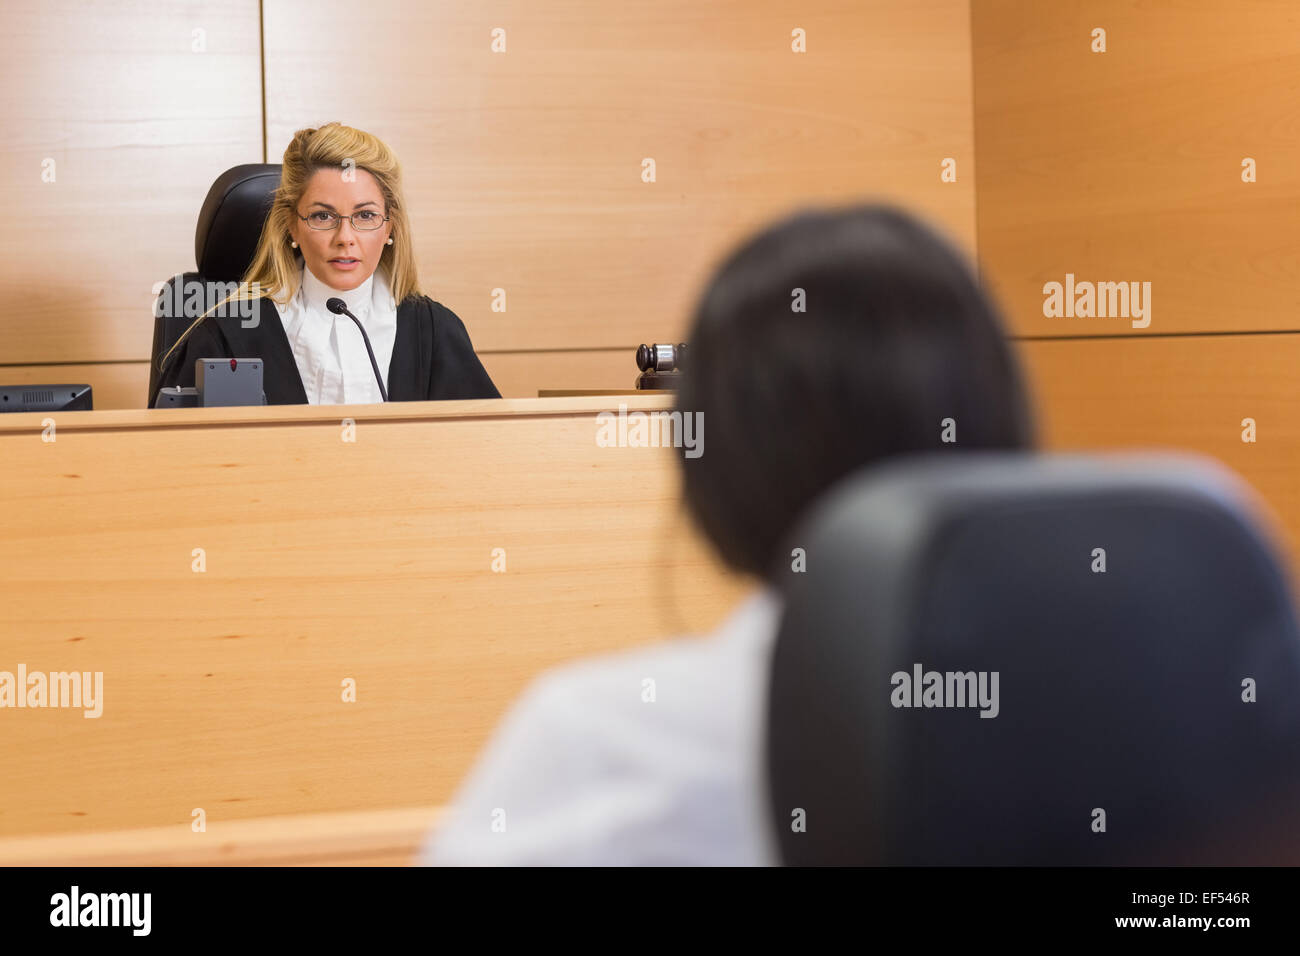 Lawyer listening to the judge Stock Photo